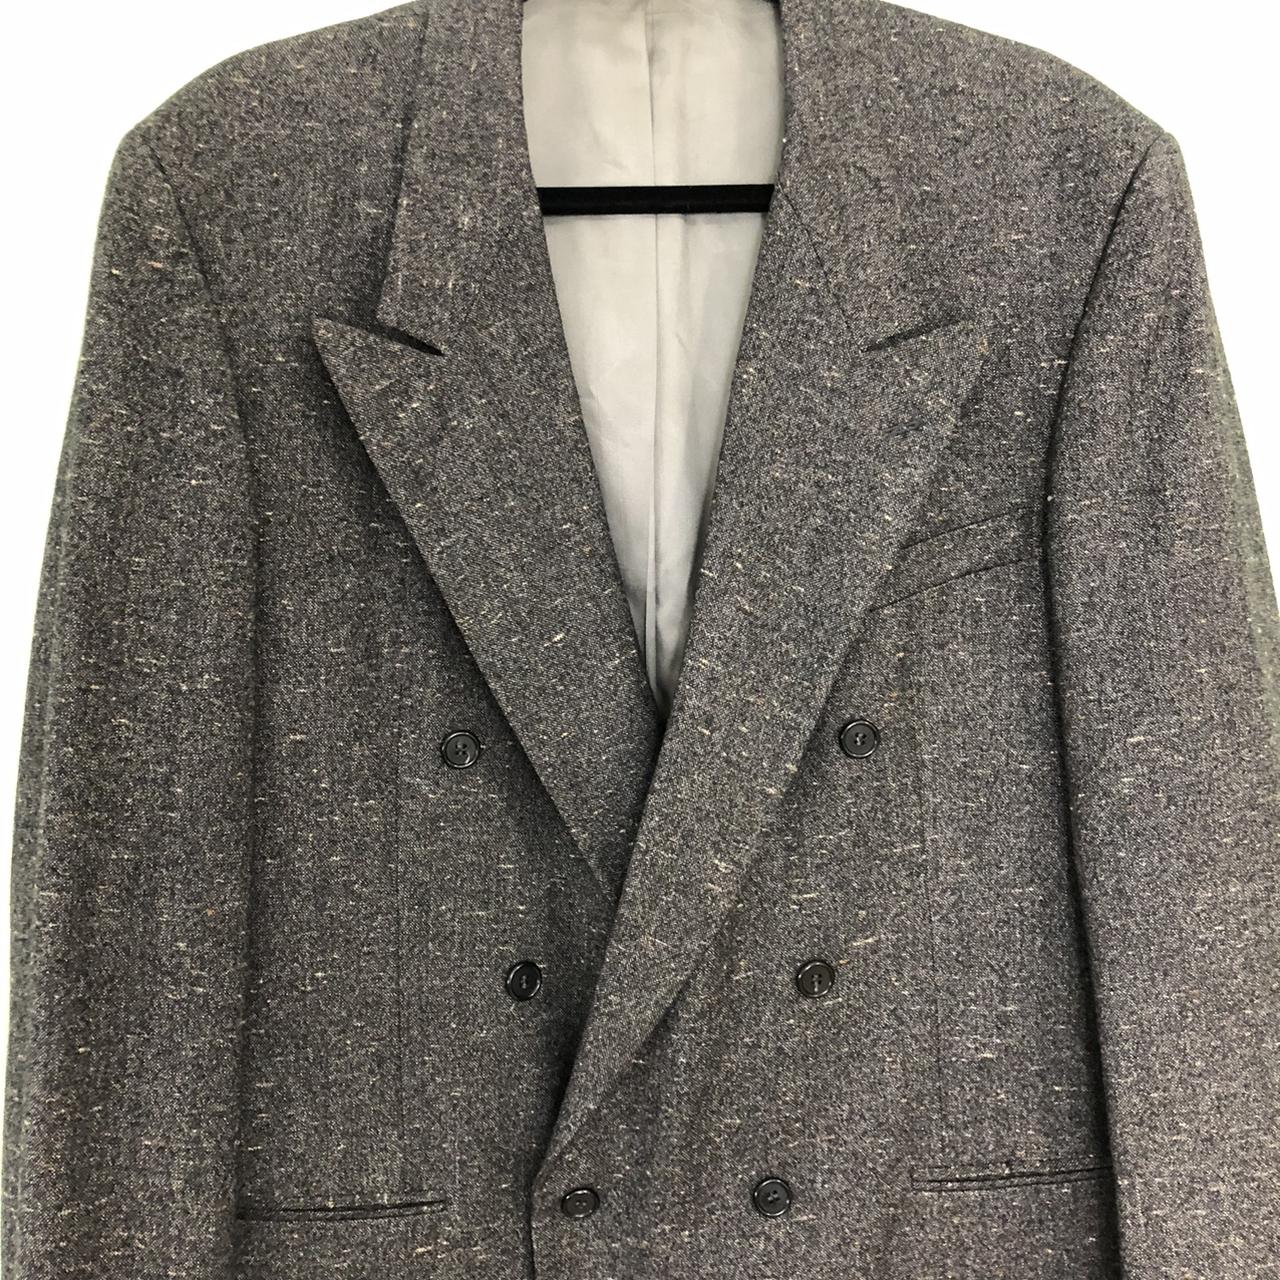 Givenchy Men's Grey and Tan Tailored-jackets | Depop